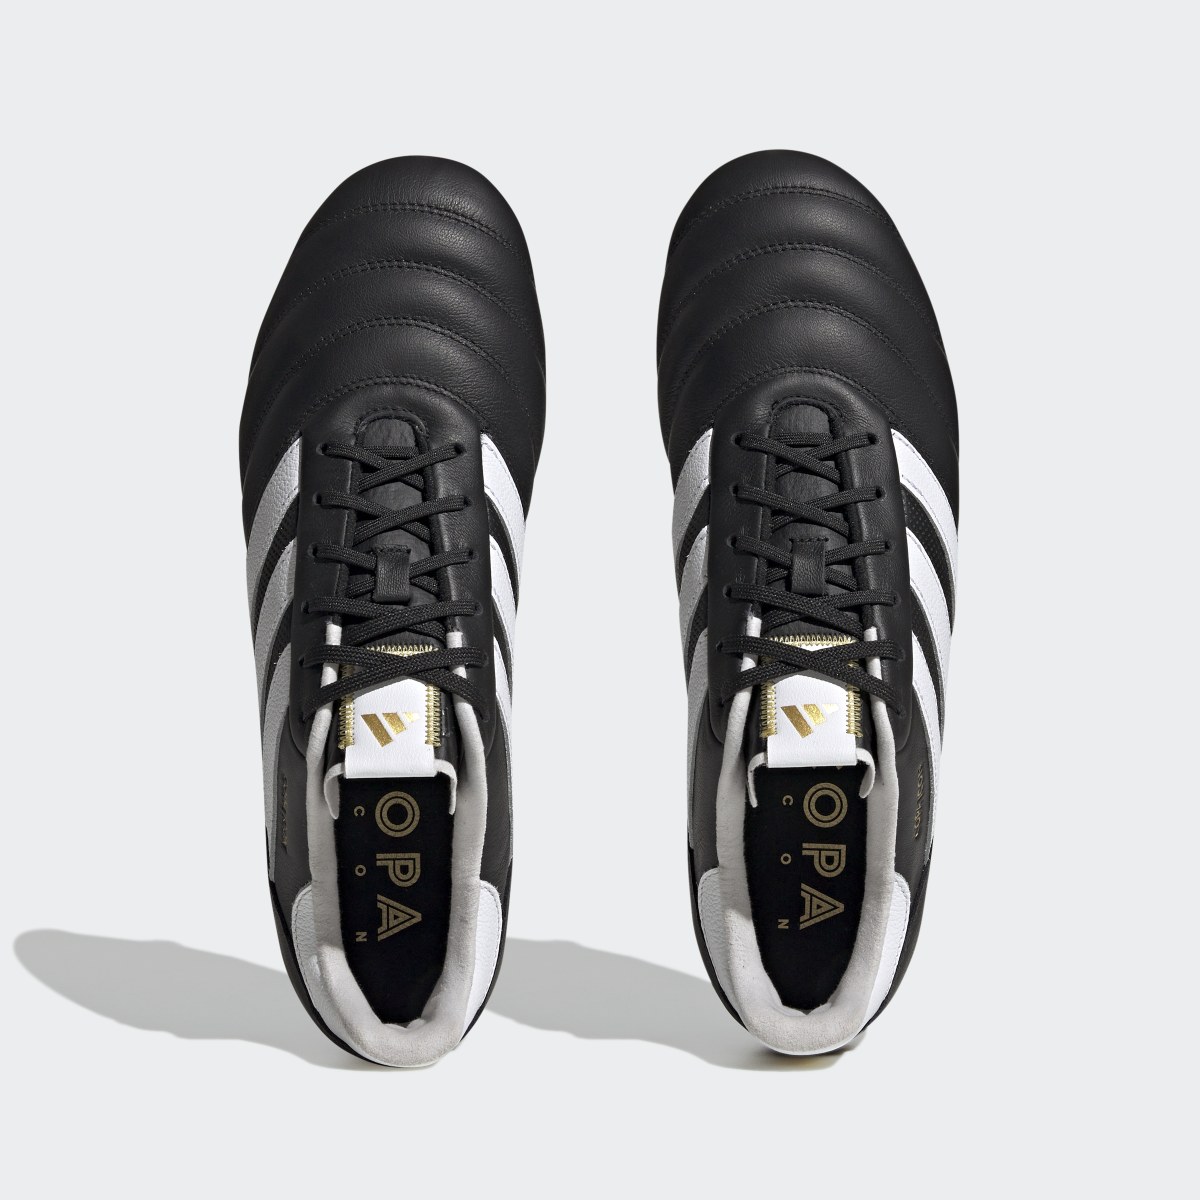 Adidas Copa Icon Firm Ground Soccer Cleats. 6